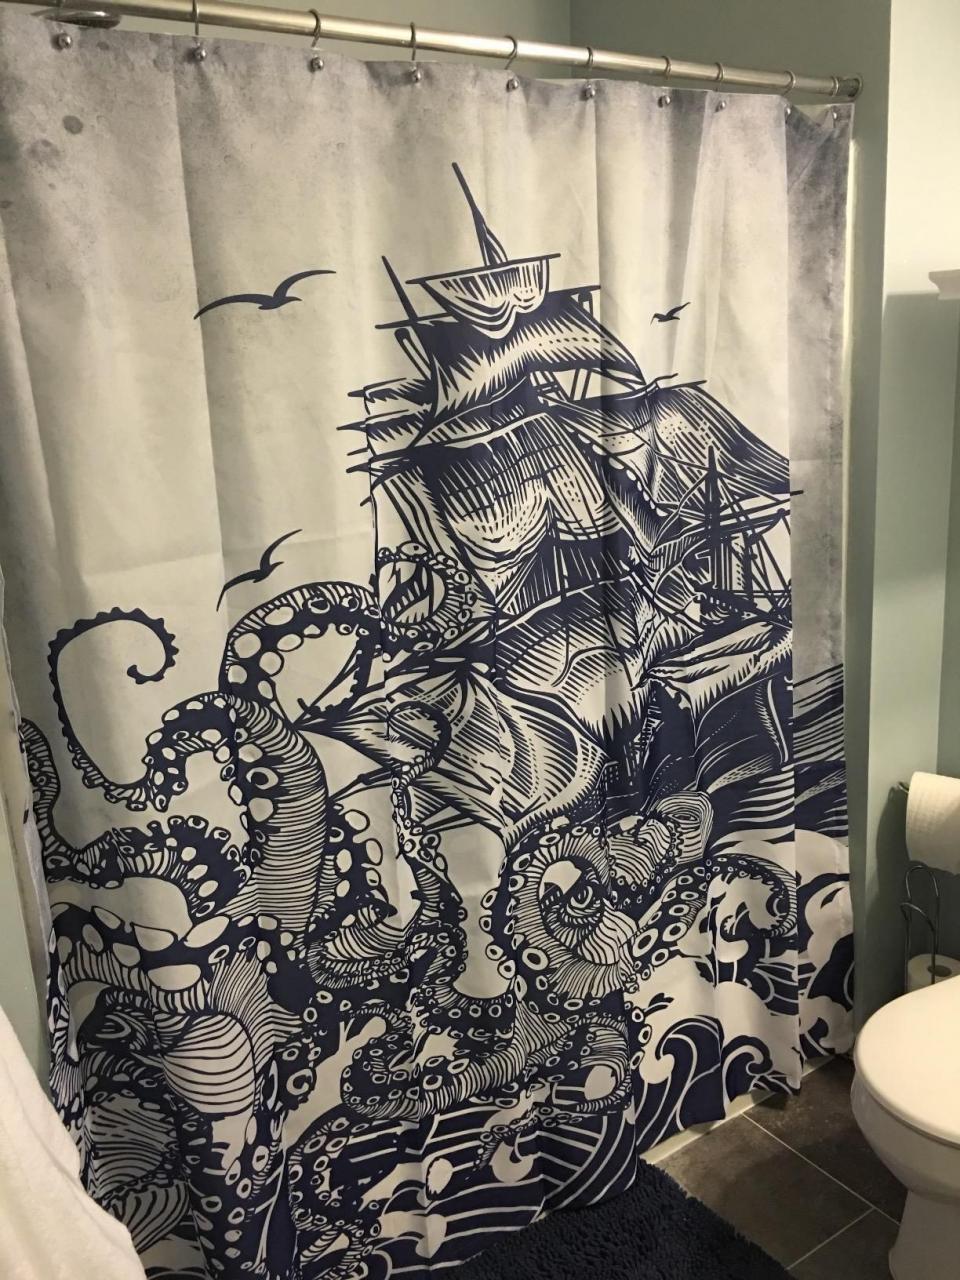 Awesome Kraken with Sailboat Octopus Shower Curtain Bathroom Decor in